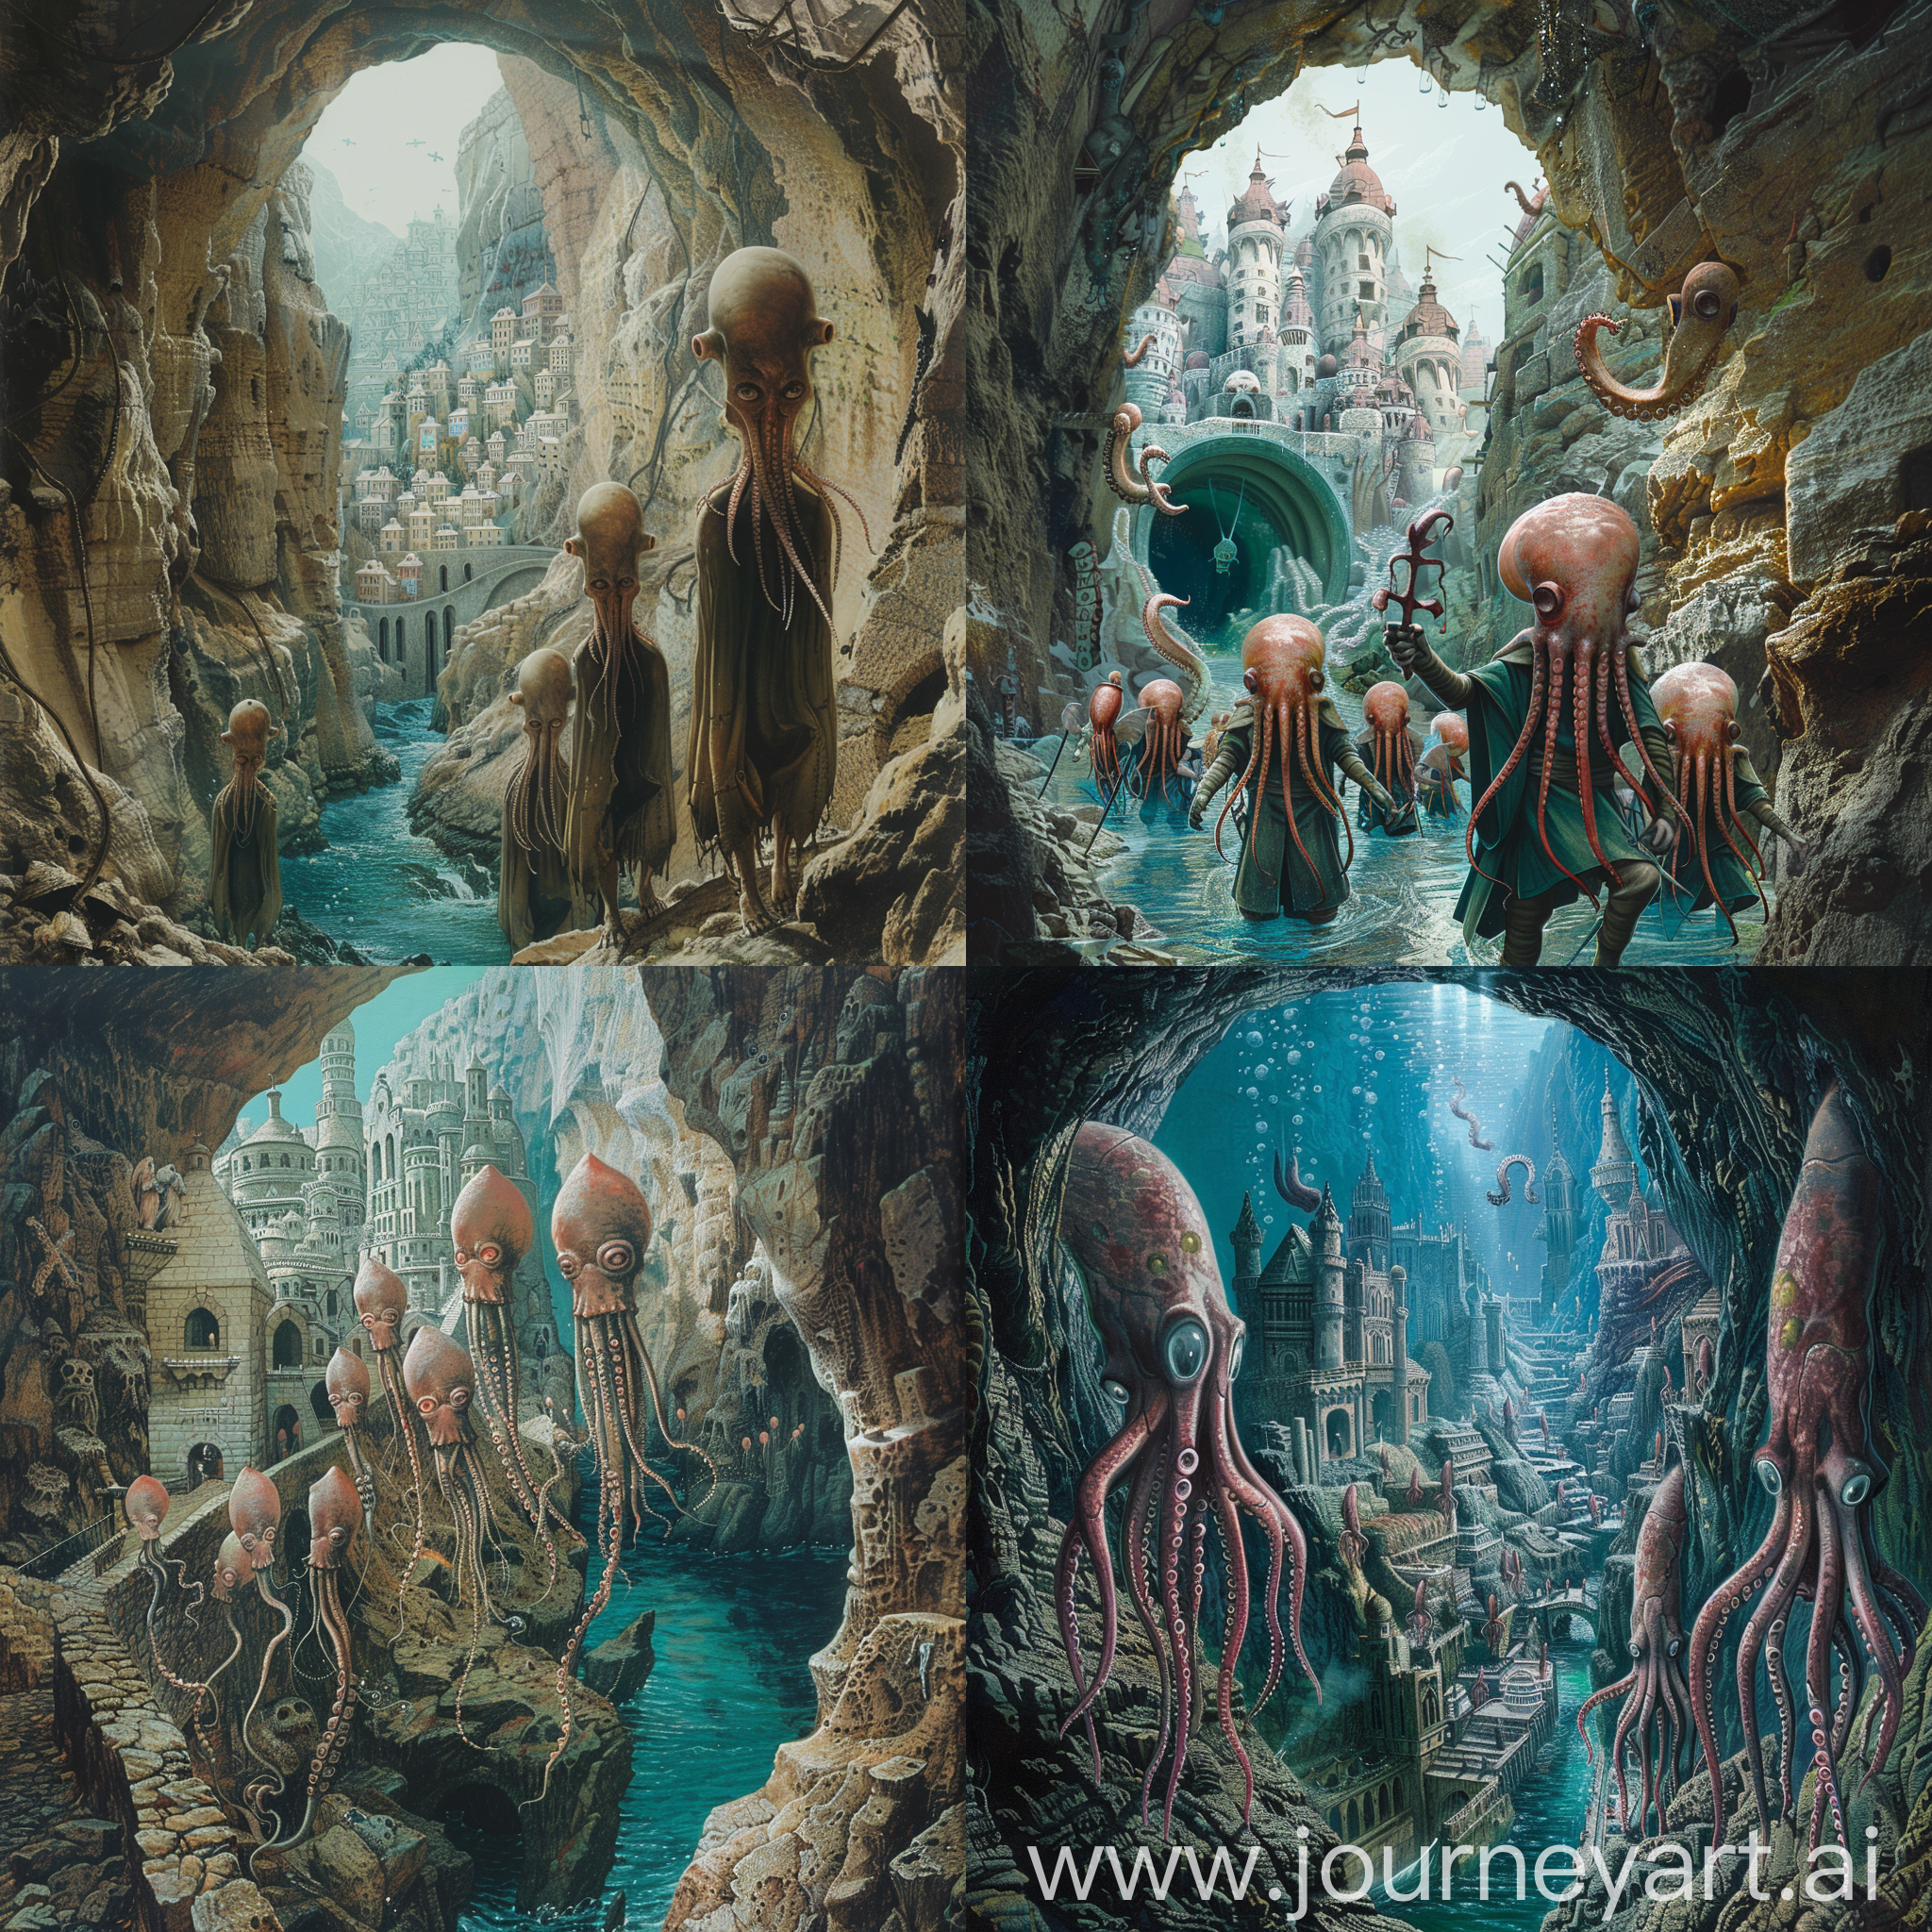 medieval bathyscaphe at the exit of a rock tunnel, underwater city of humanoid creatures with squid heads, ocean depths, city panorama, fantasy